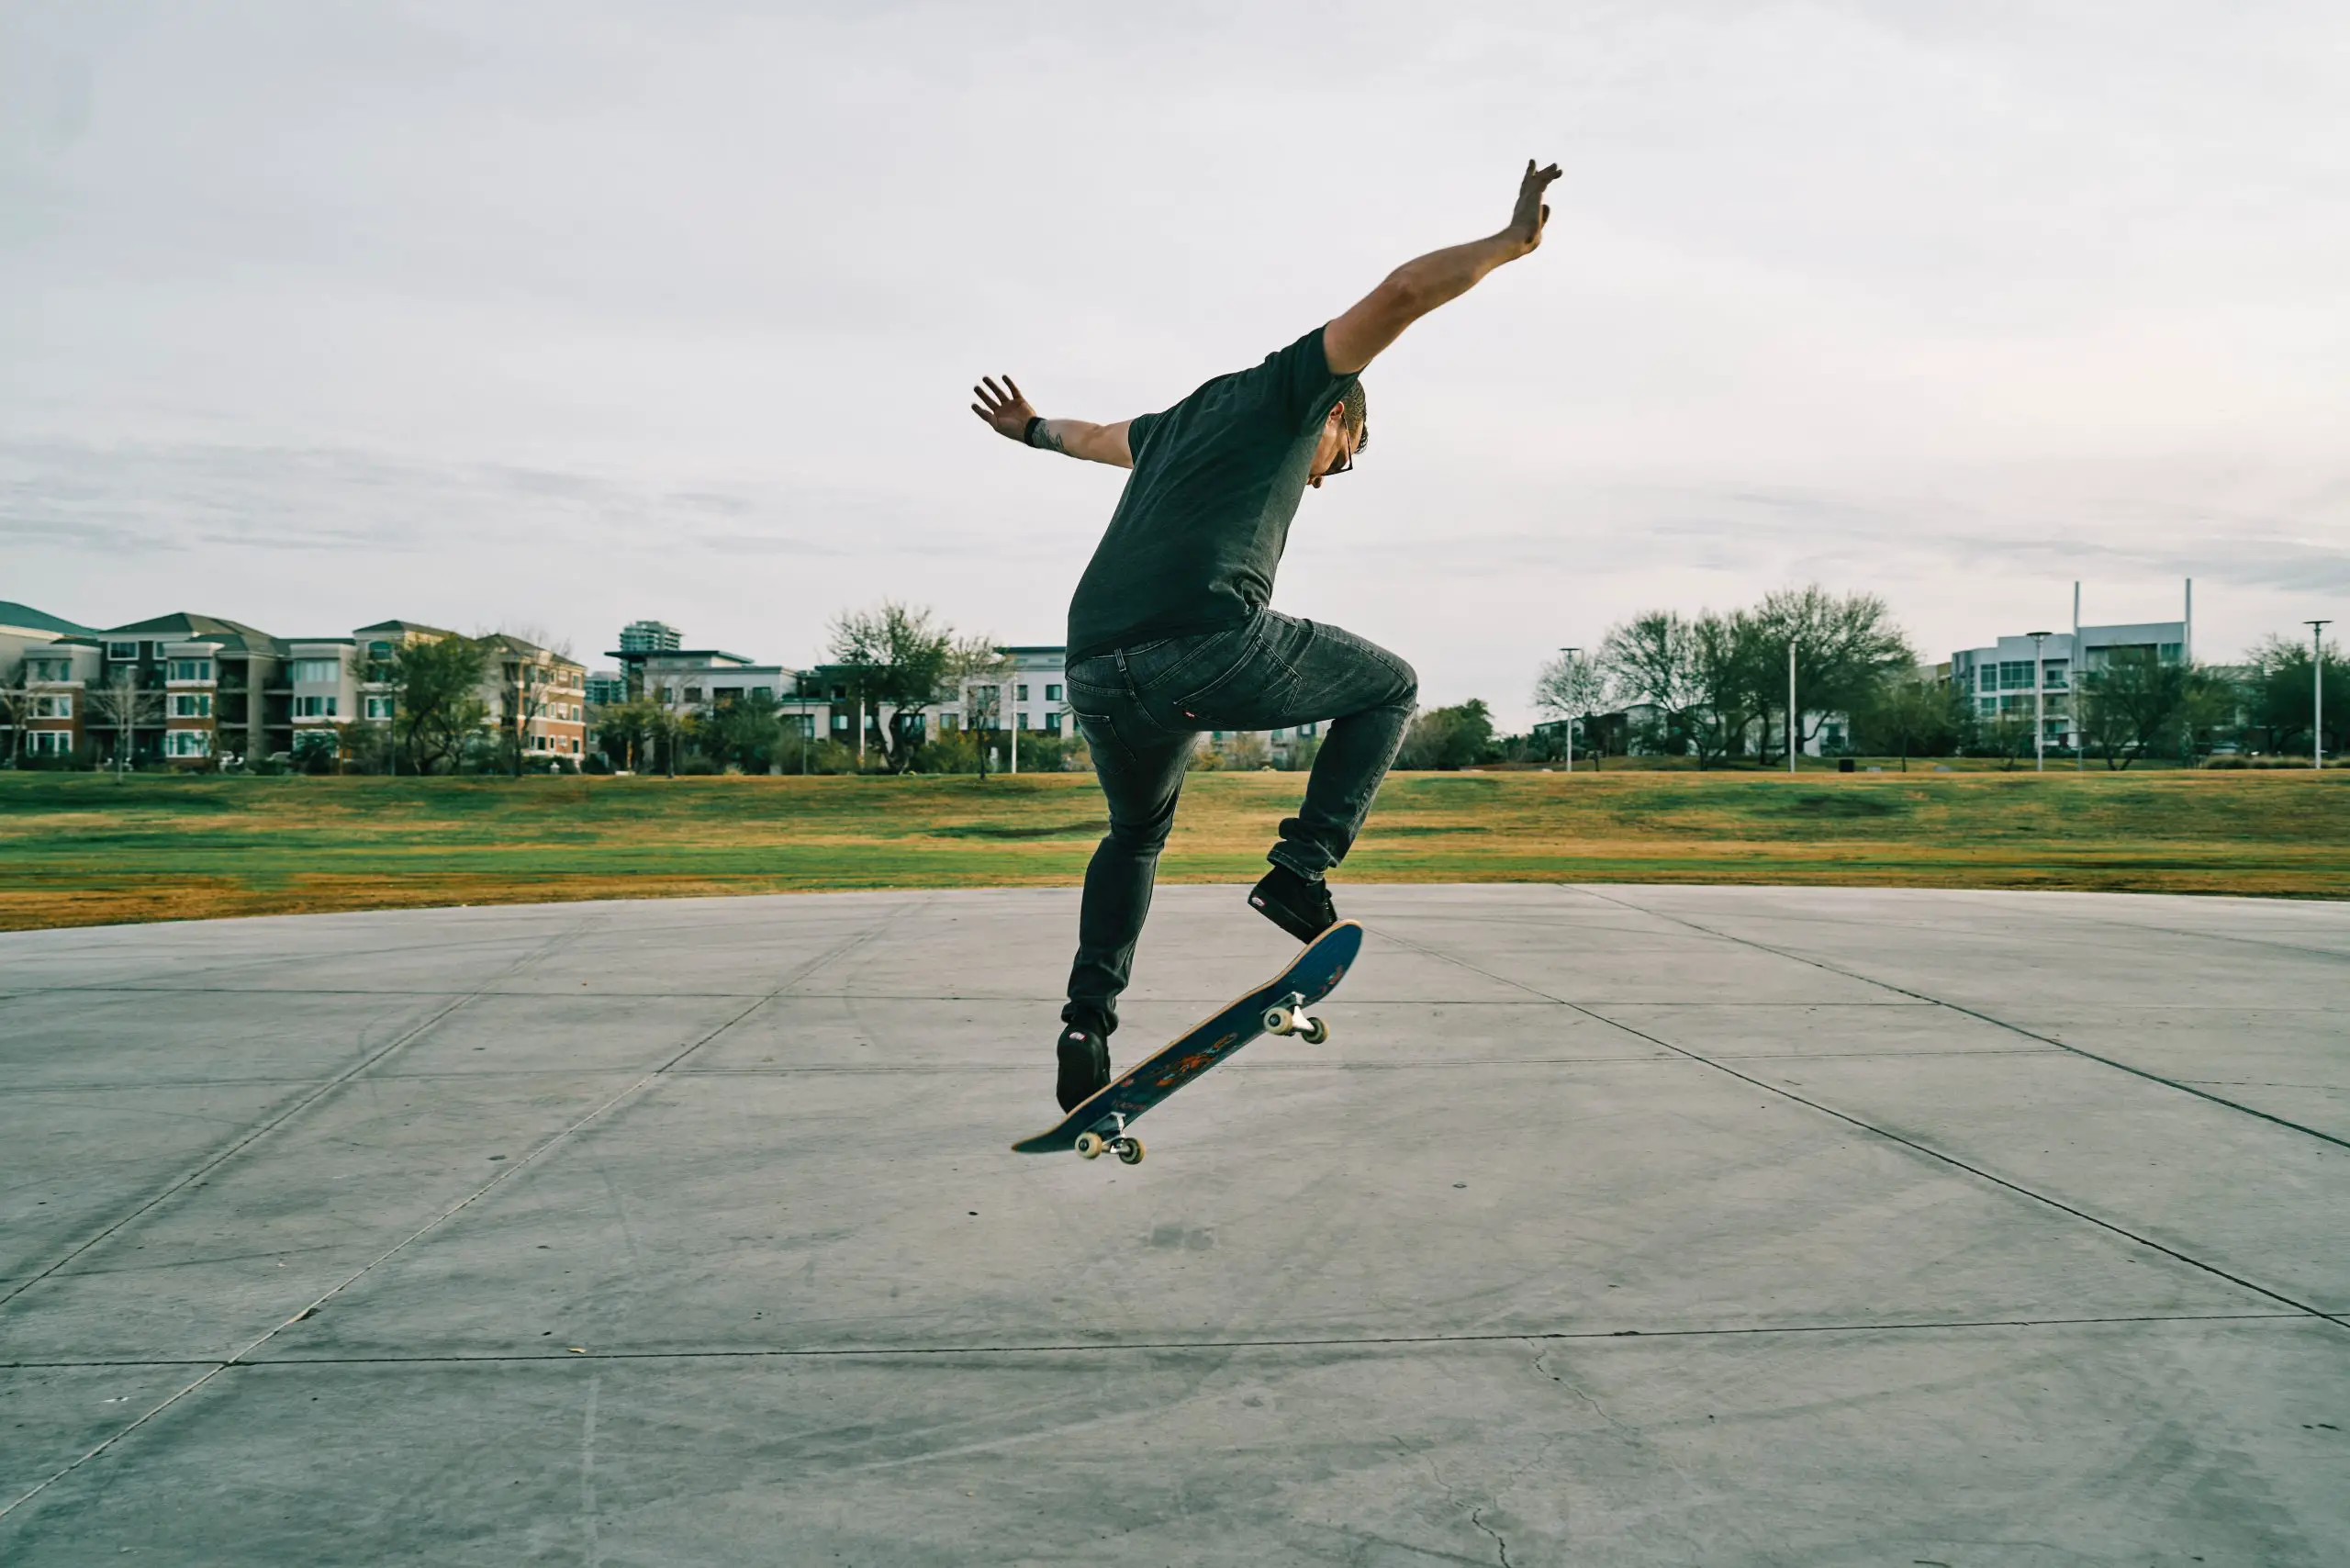 Image of a skateboarder performing some tricks in a skateboard court. Source: convertkit, unsplash